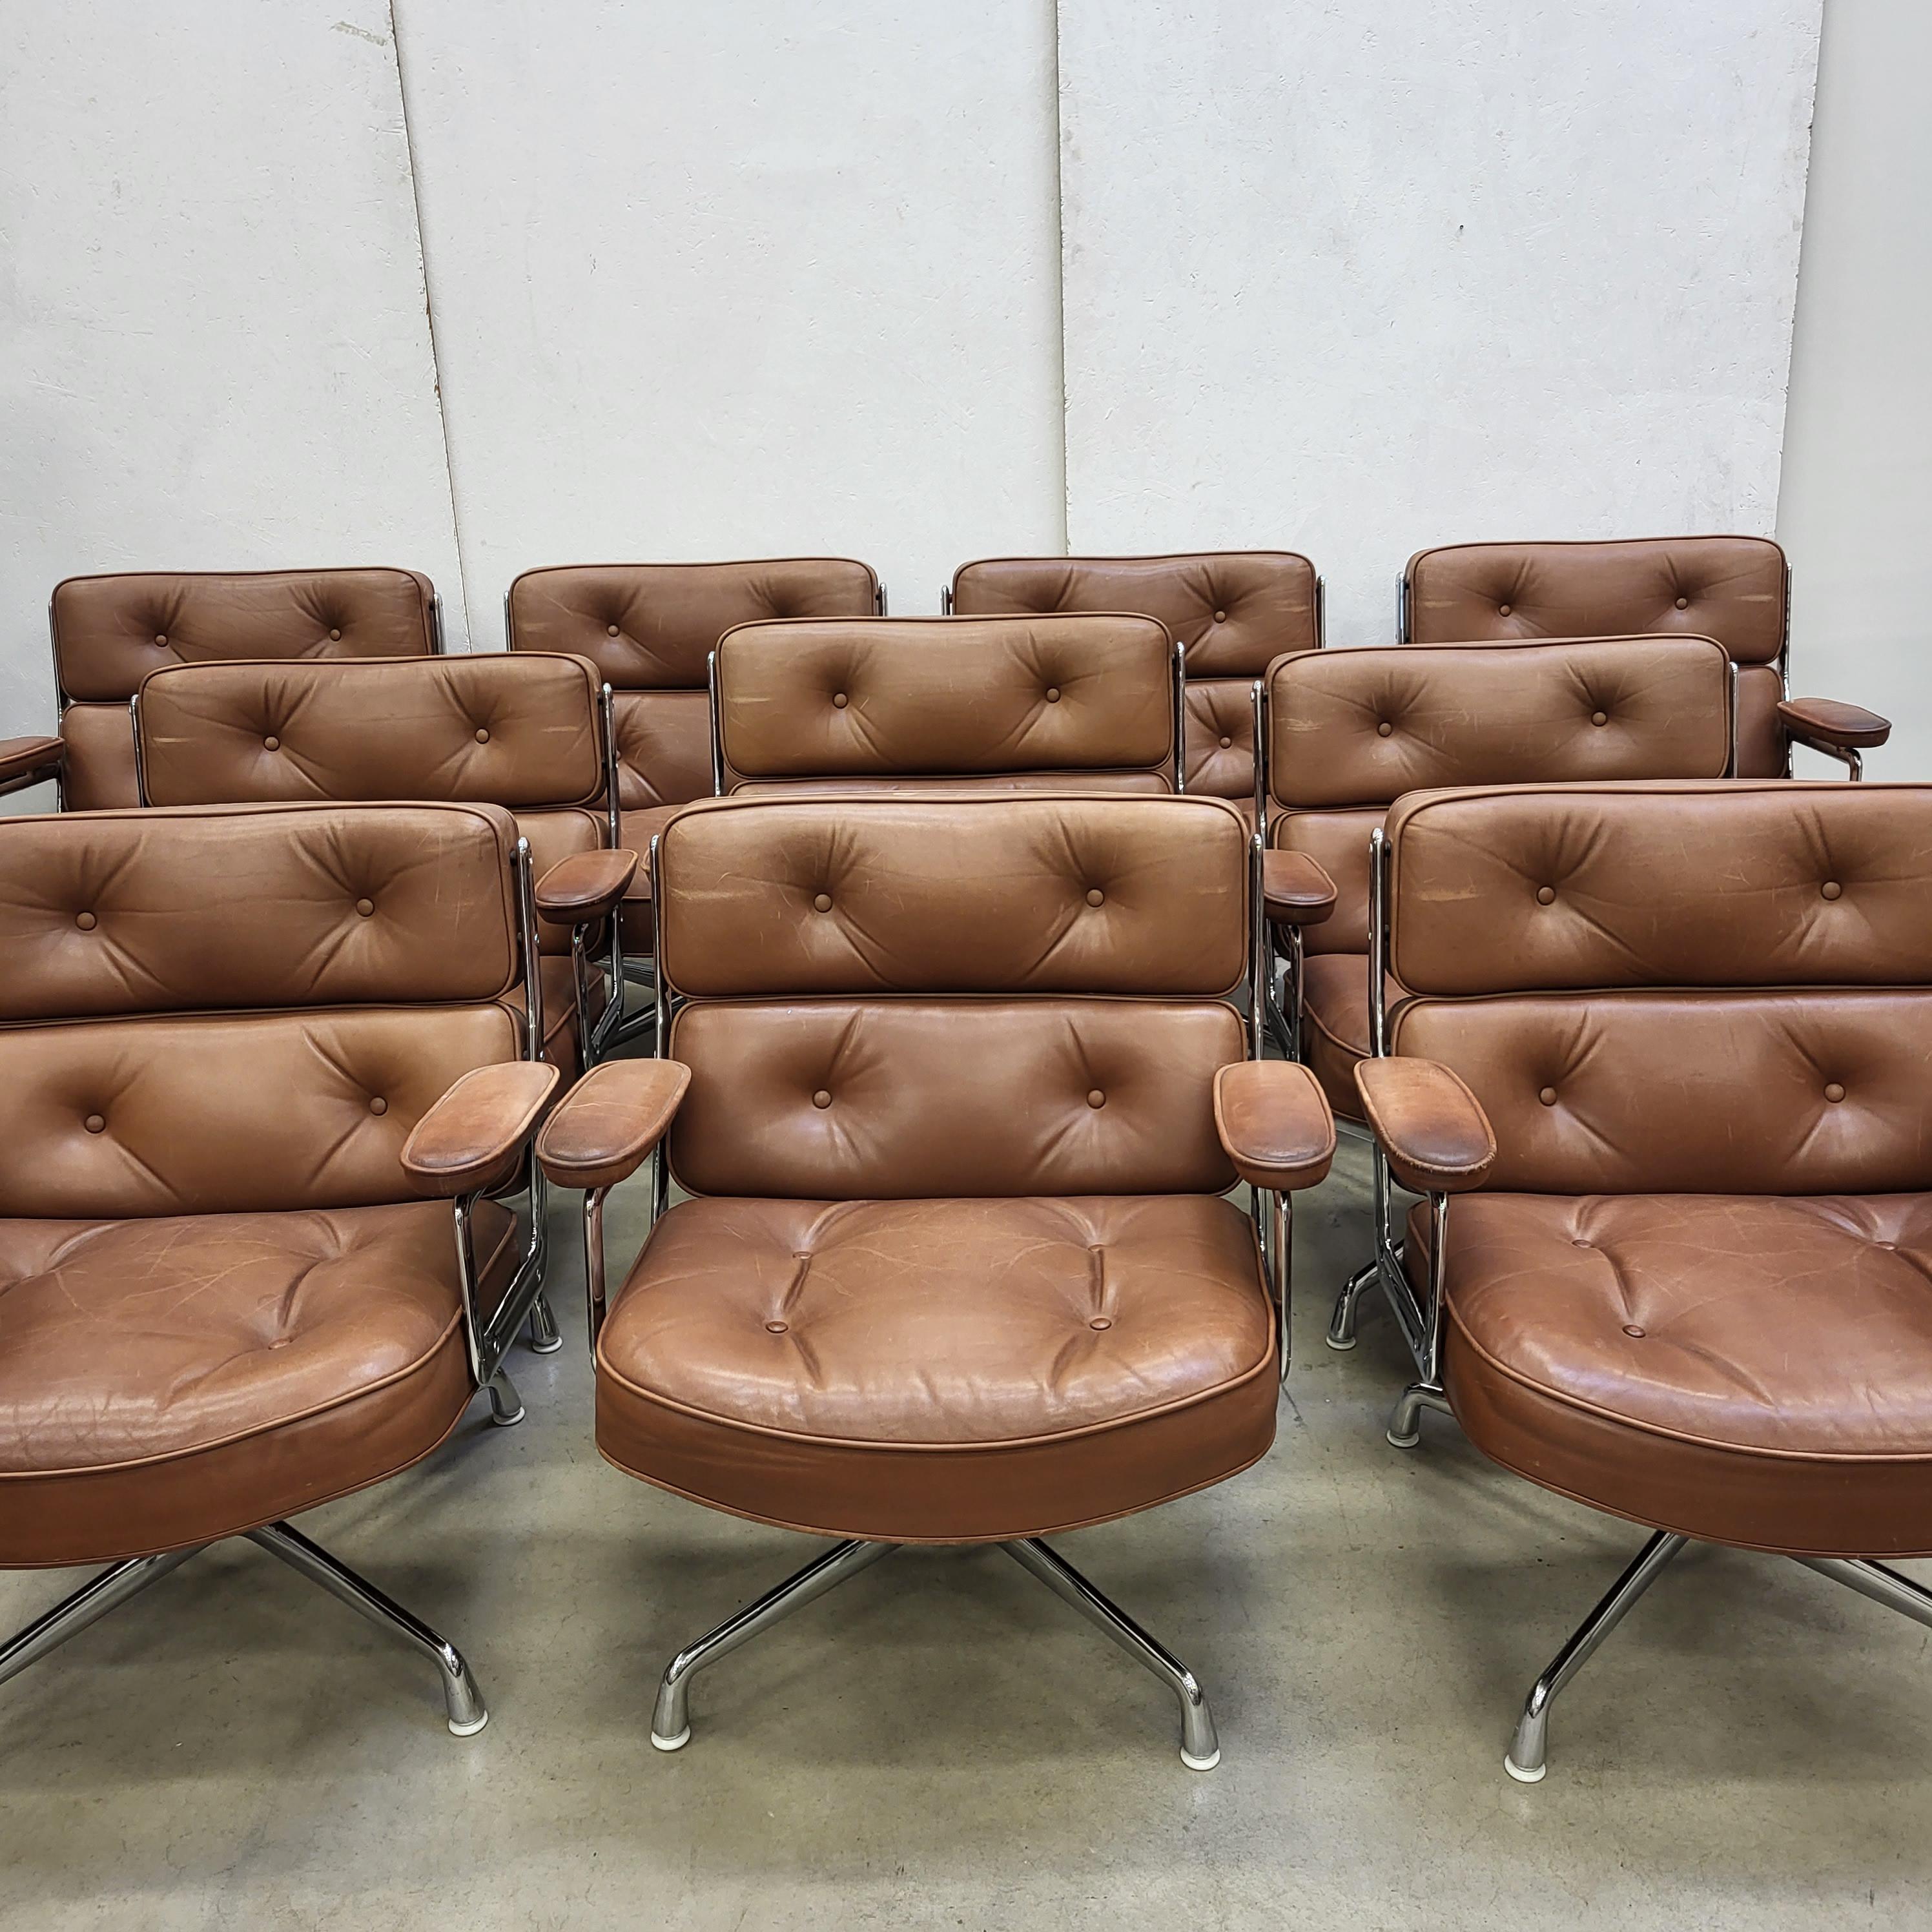 Rare set of 10 Time life Lobby Chair model ES105 produced by Vitra/Herman Miller. 
The chairs features a chromed aluminium frame on a chromed aluminium base.
Rare and wonderful colour combination and the wider ES105 edition.

Overall the Lobby